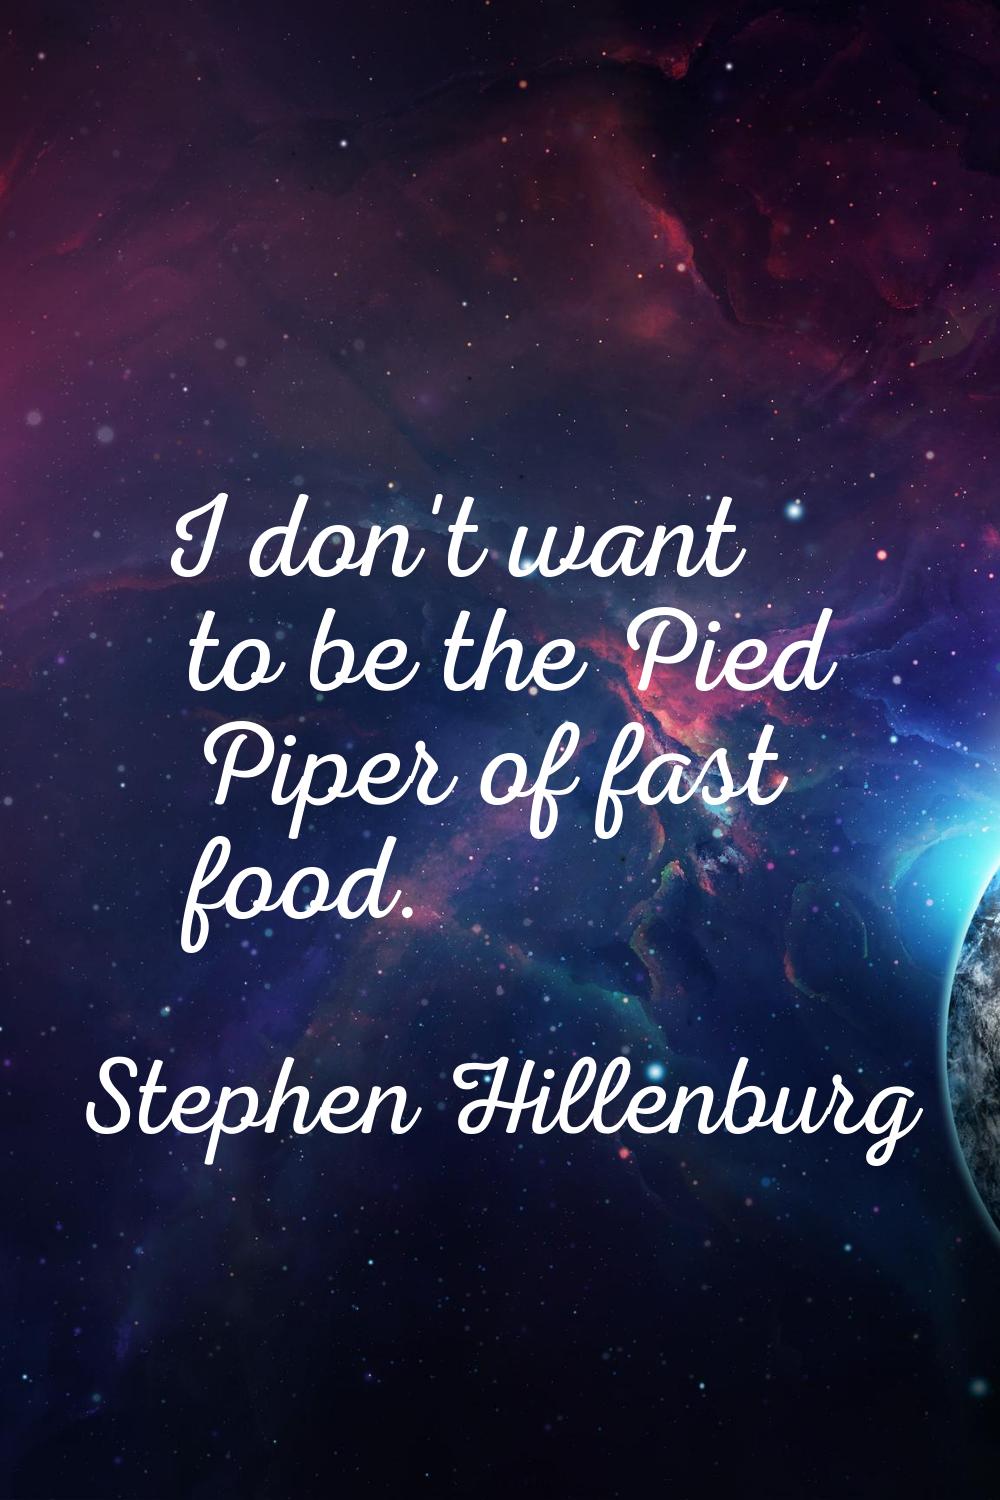 I don't want to be the Pied Piper of fast food.